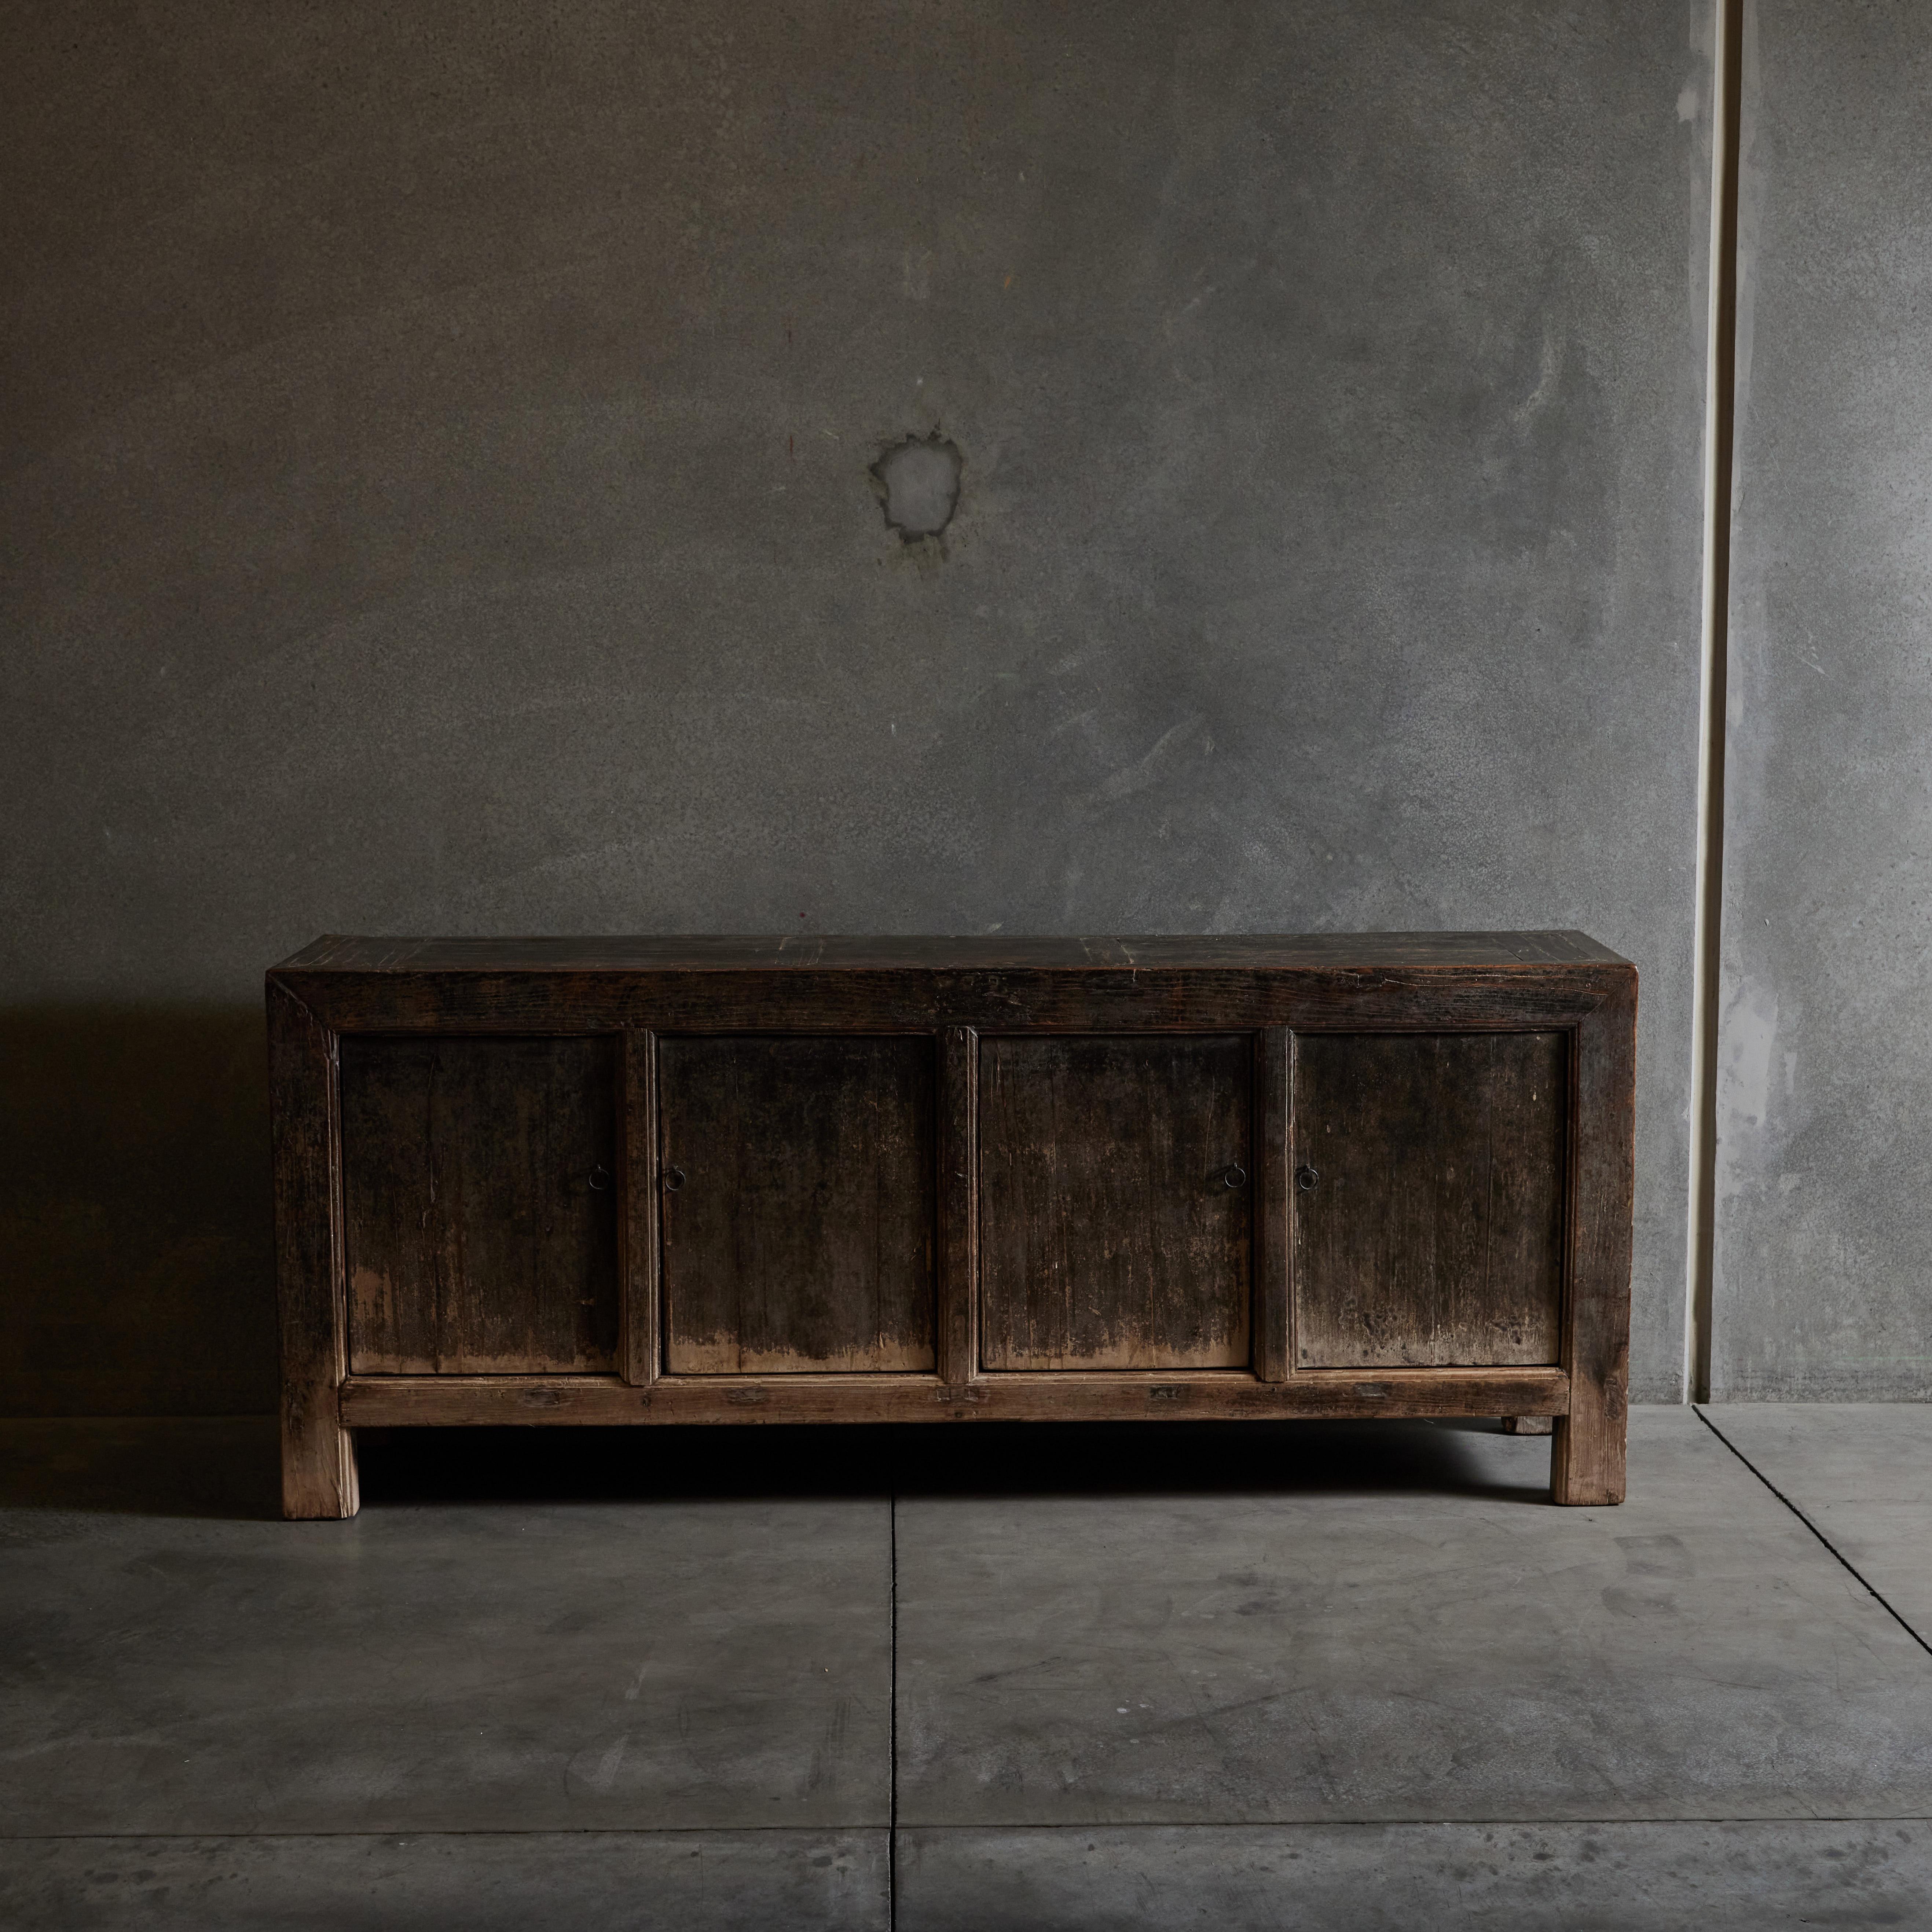 Patinated wood cabinet/credenza. Made in China, circa early 20th century.